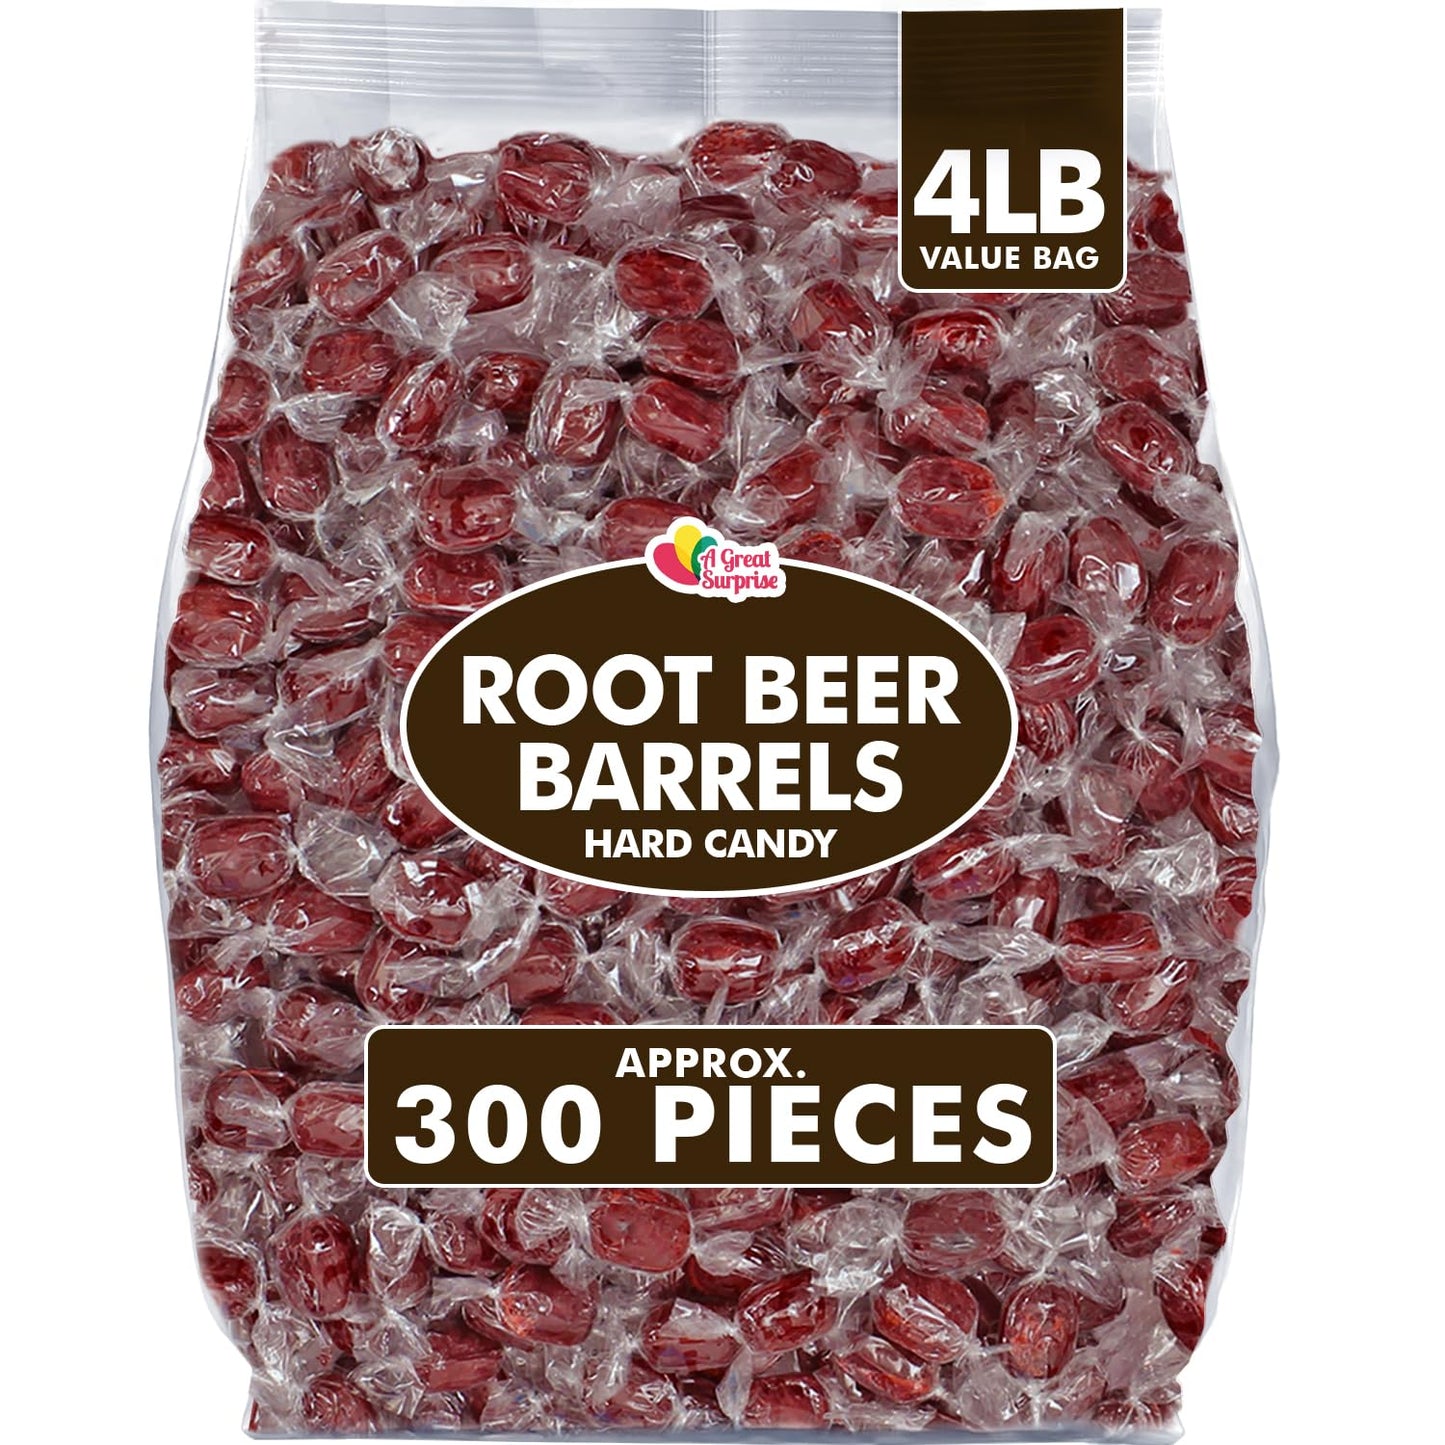 Root Beer Barrels - 4 Pounds - Root Beer Hard Candy - Old Fashion Candy - Brown Hard Candy - Individually Wrapped Bulk Candies - Candy Drops